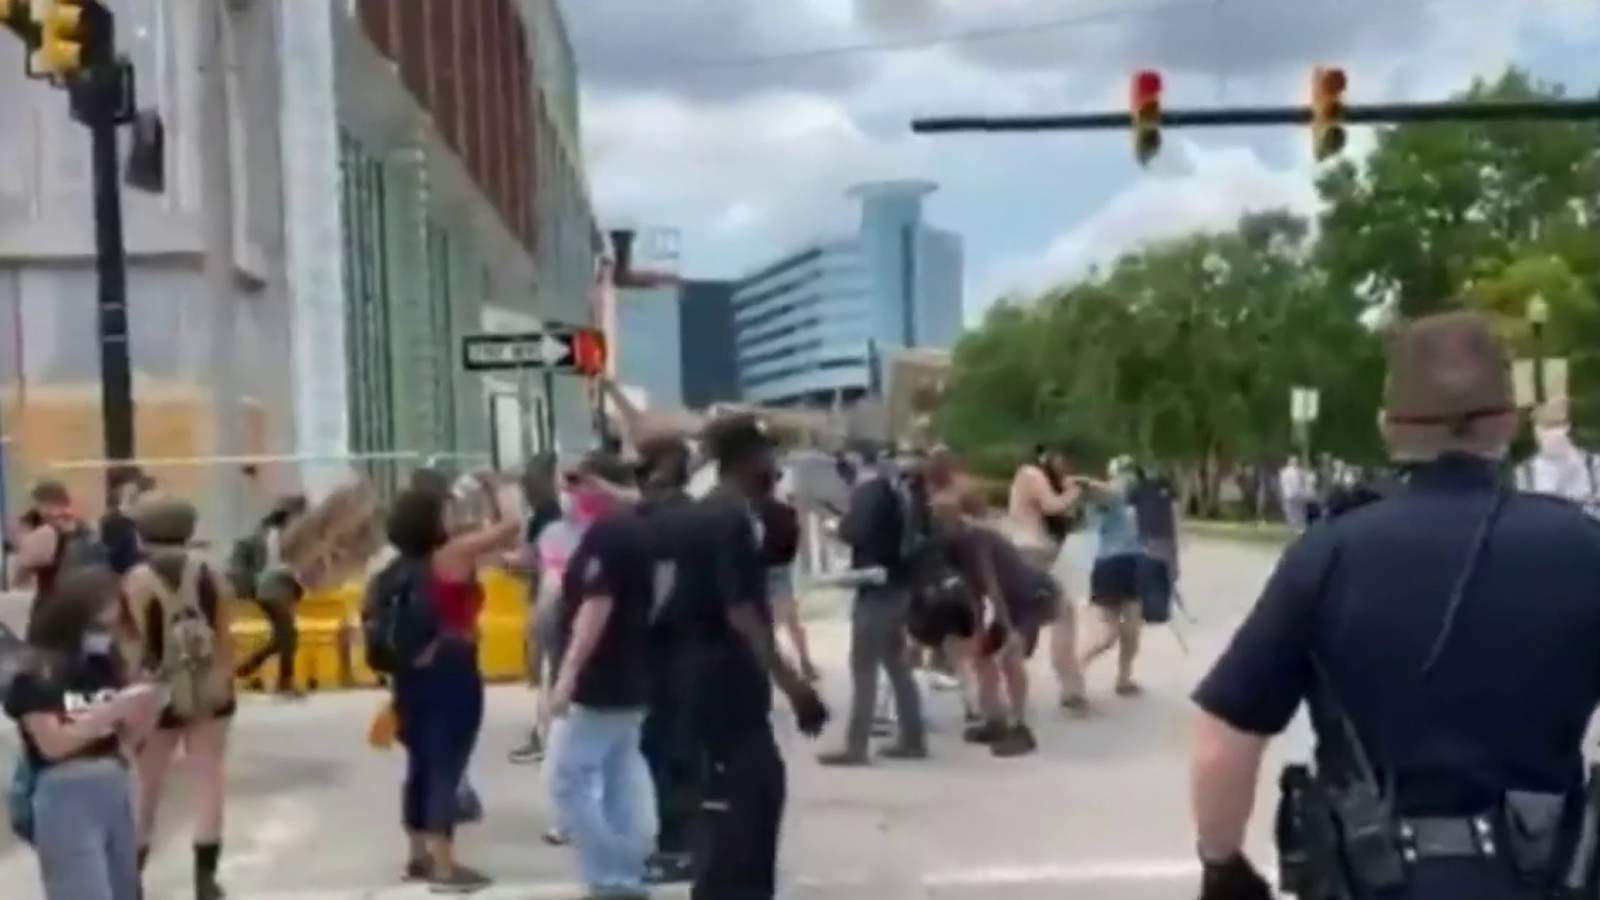 MLive reporter arrested at ‘Proud Boys’ rally in Kalamazoo, posts show